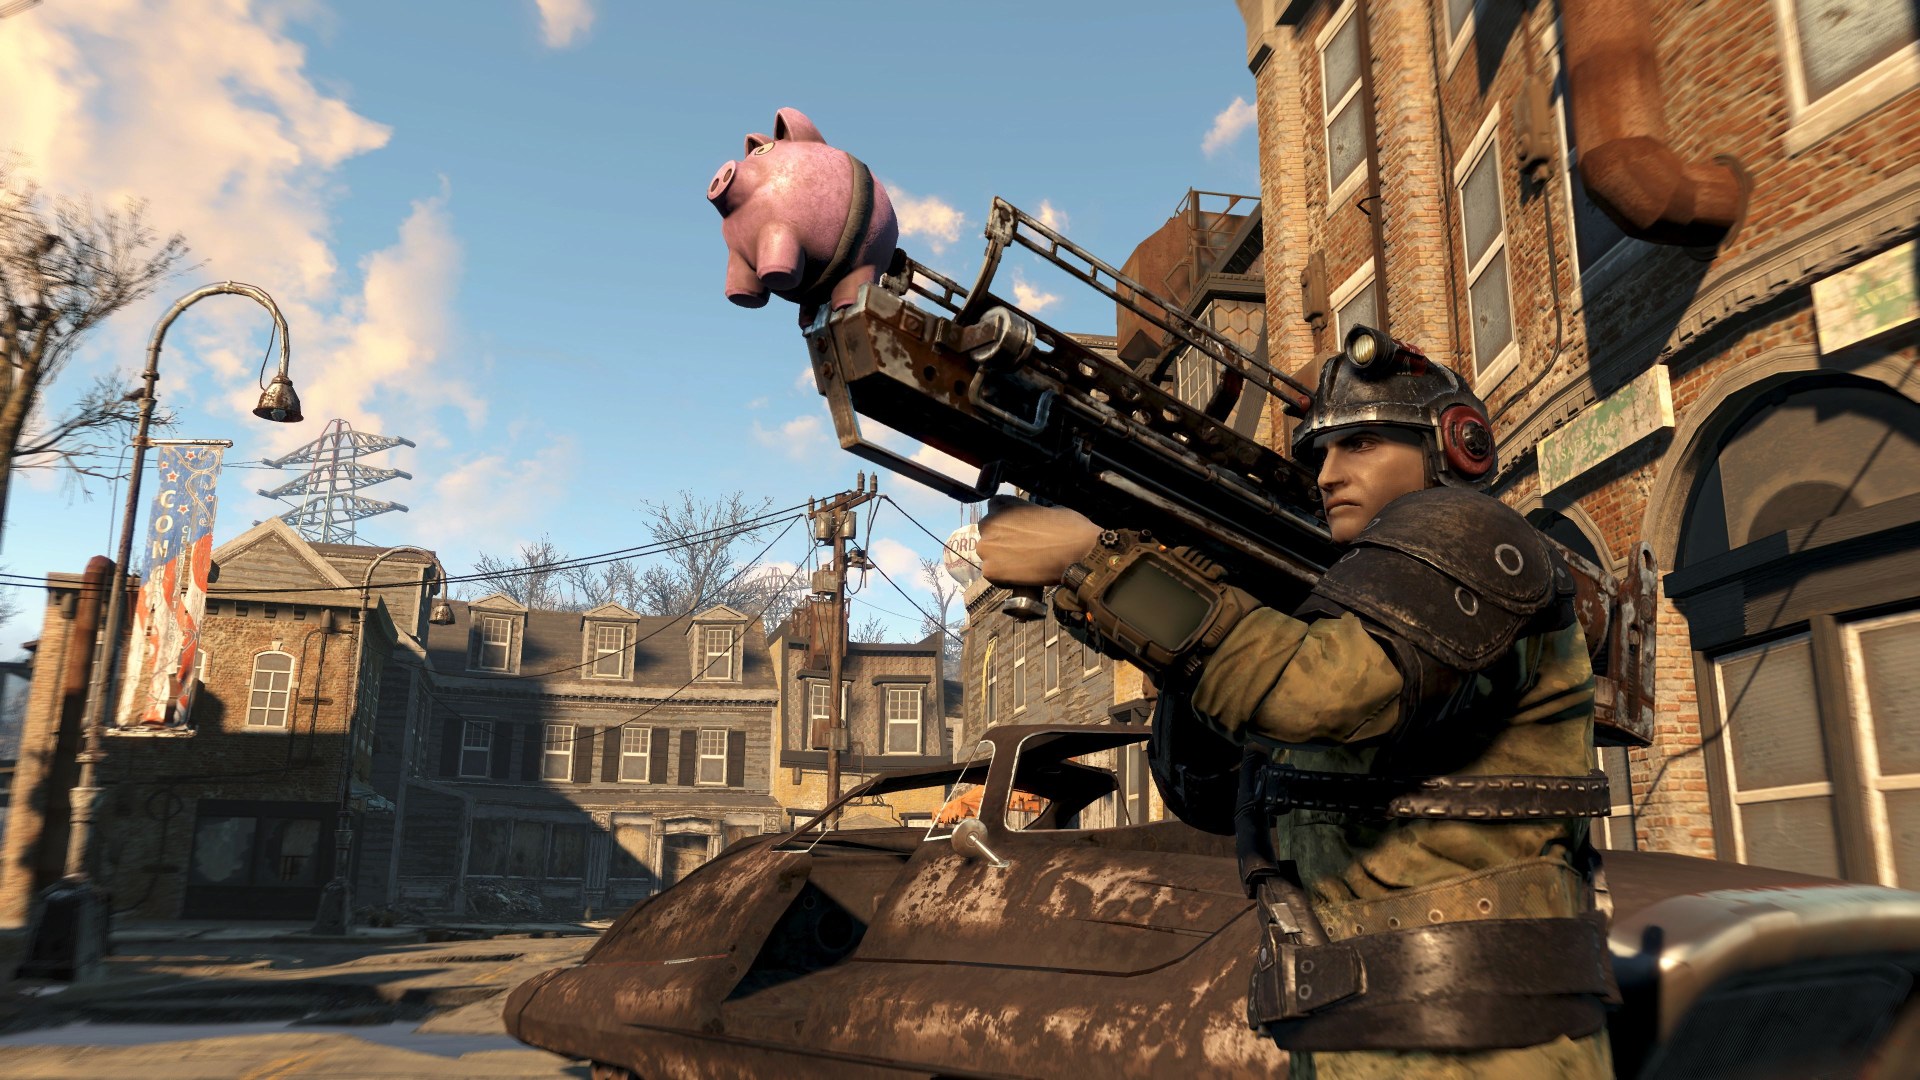 amazon, microsoft, games inbox: is fallout 4 still worth playing?